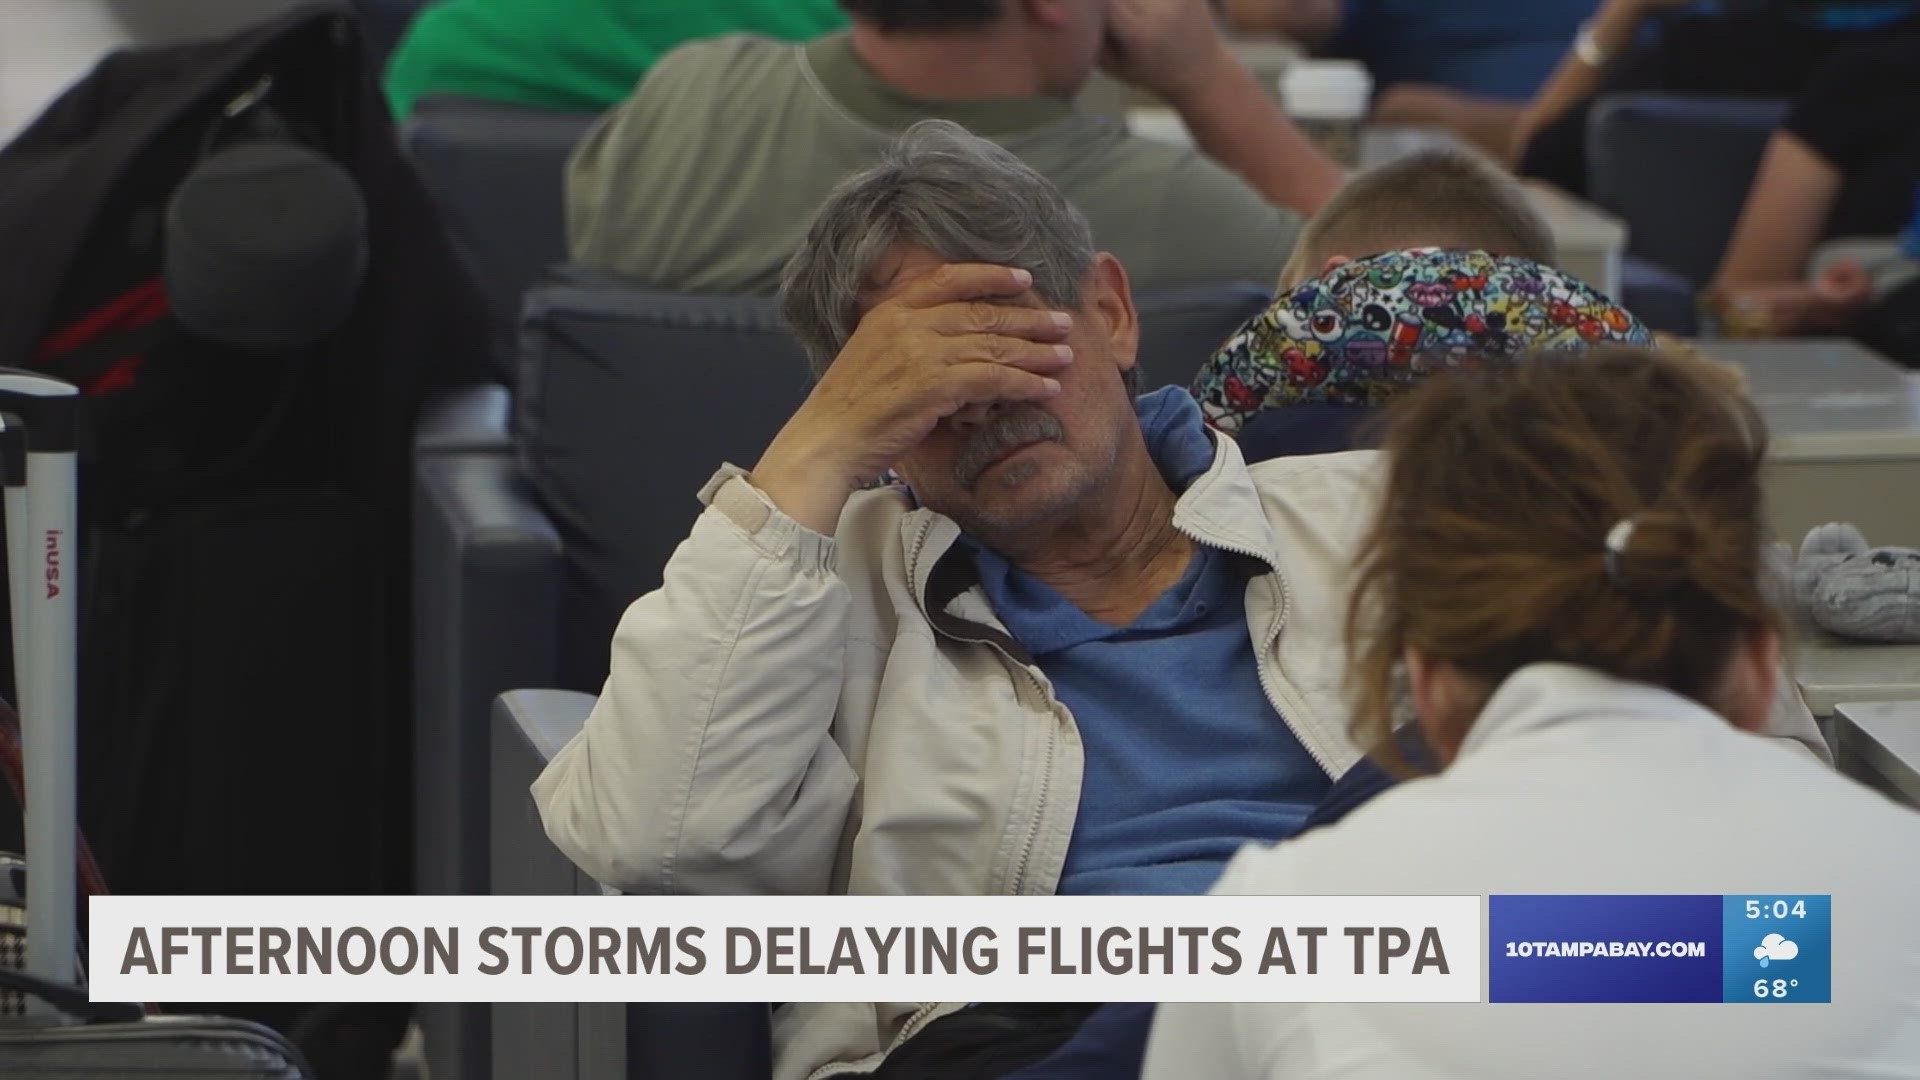 10 Tampa Bay talked to one traveler whose flight was delayed four times since Wednesday morning.